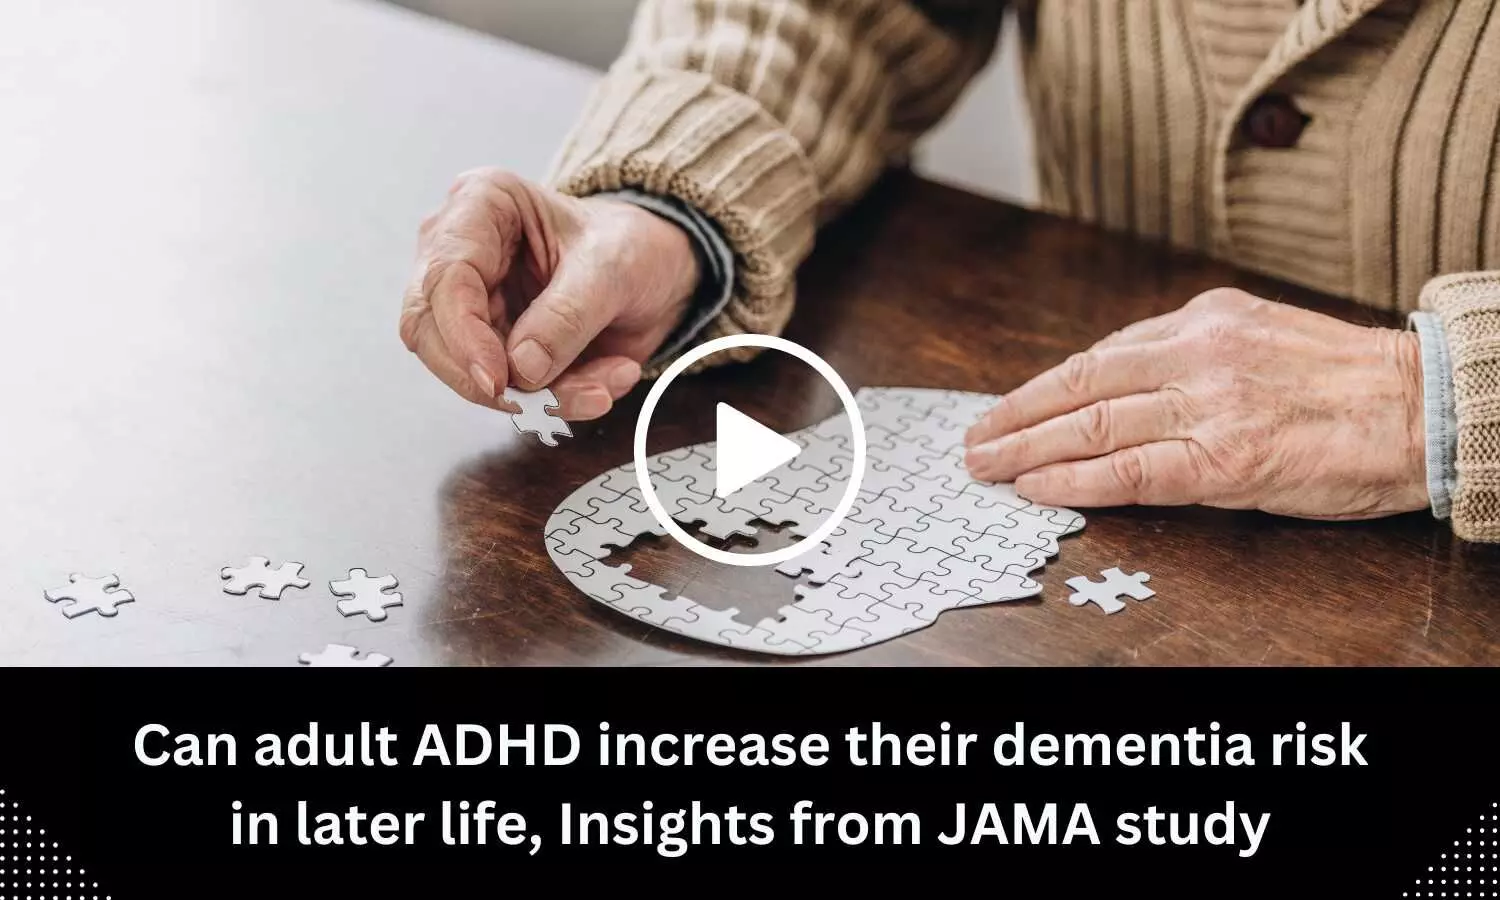 Can adult ADHD increase their dementia risk in later life, Insights from JAMA study